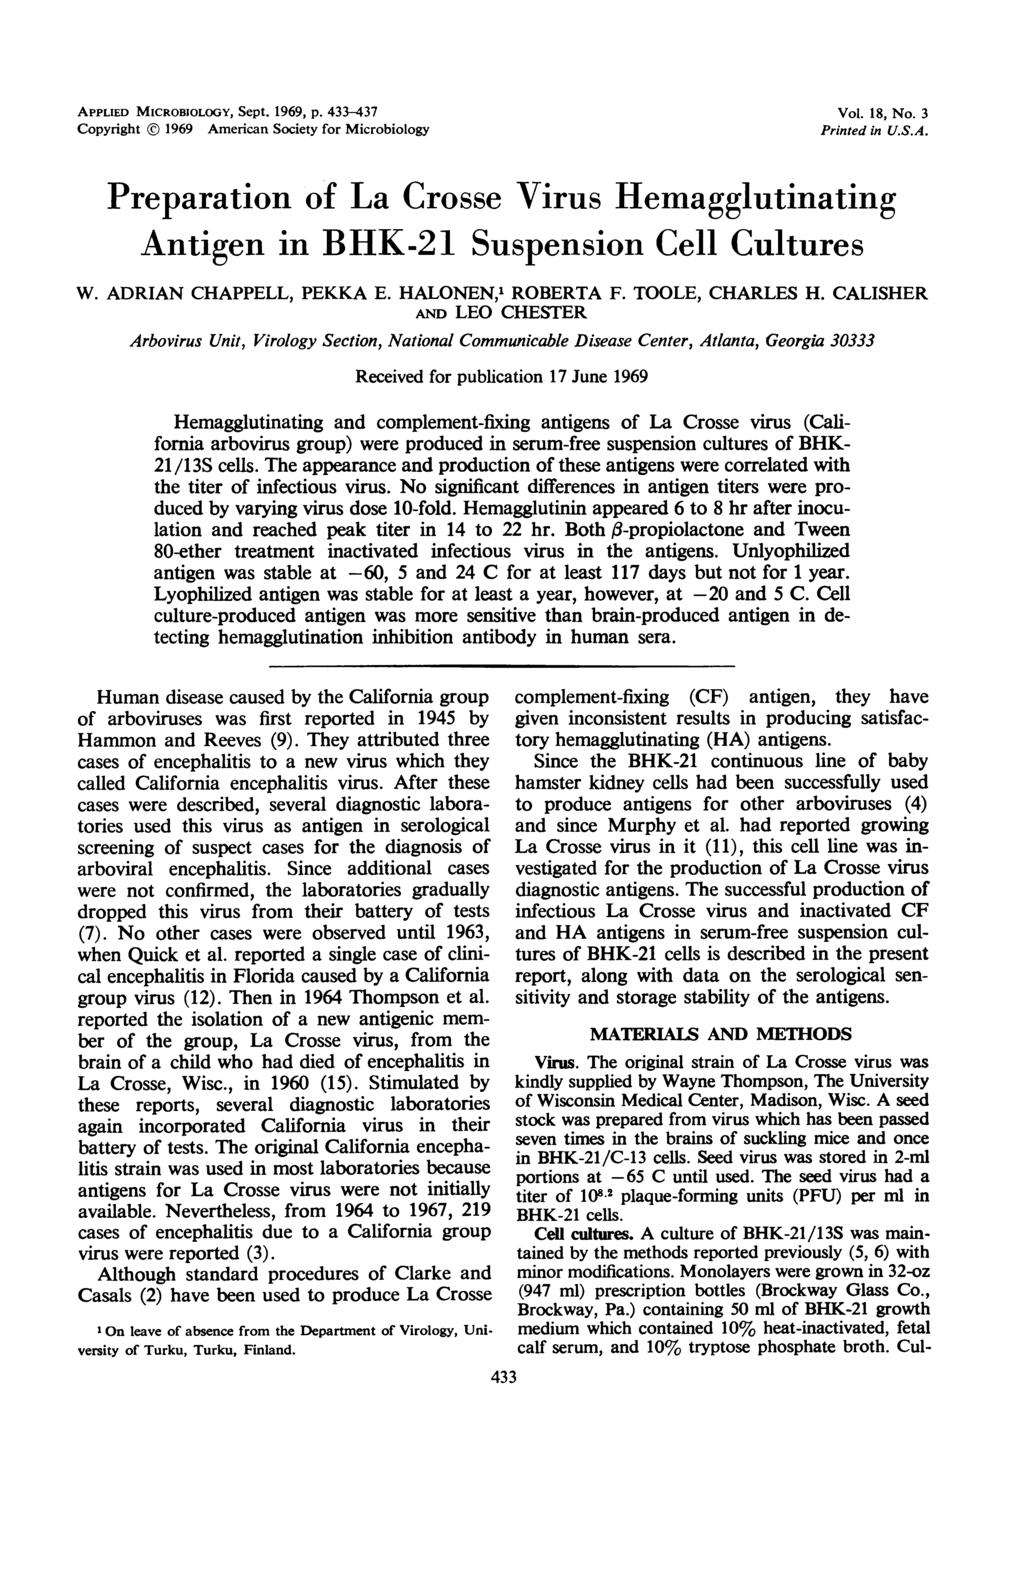 APPLIED MICROBIOLOGY, Sept. 1969, p. 33-37 Copyright 1969 American Society for Microbiology Vol. 18, No. 3 Printed in U.S.A. Preparation of La Crosse Virus Hemagglutinating Antigen in BHK-21 Suspension Cell Cultures W.